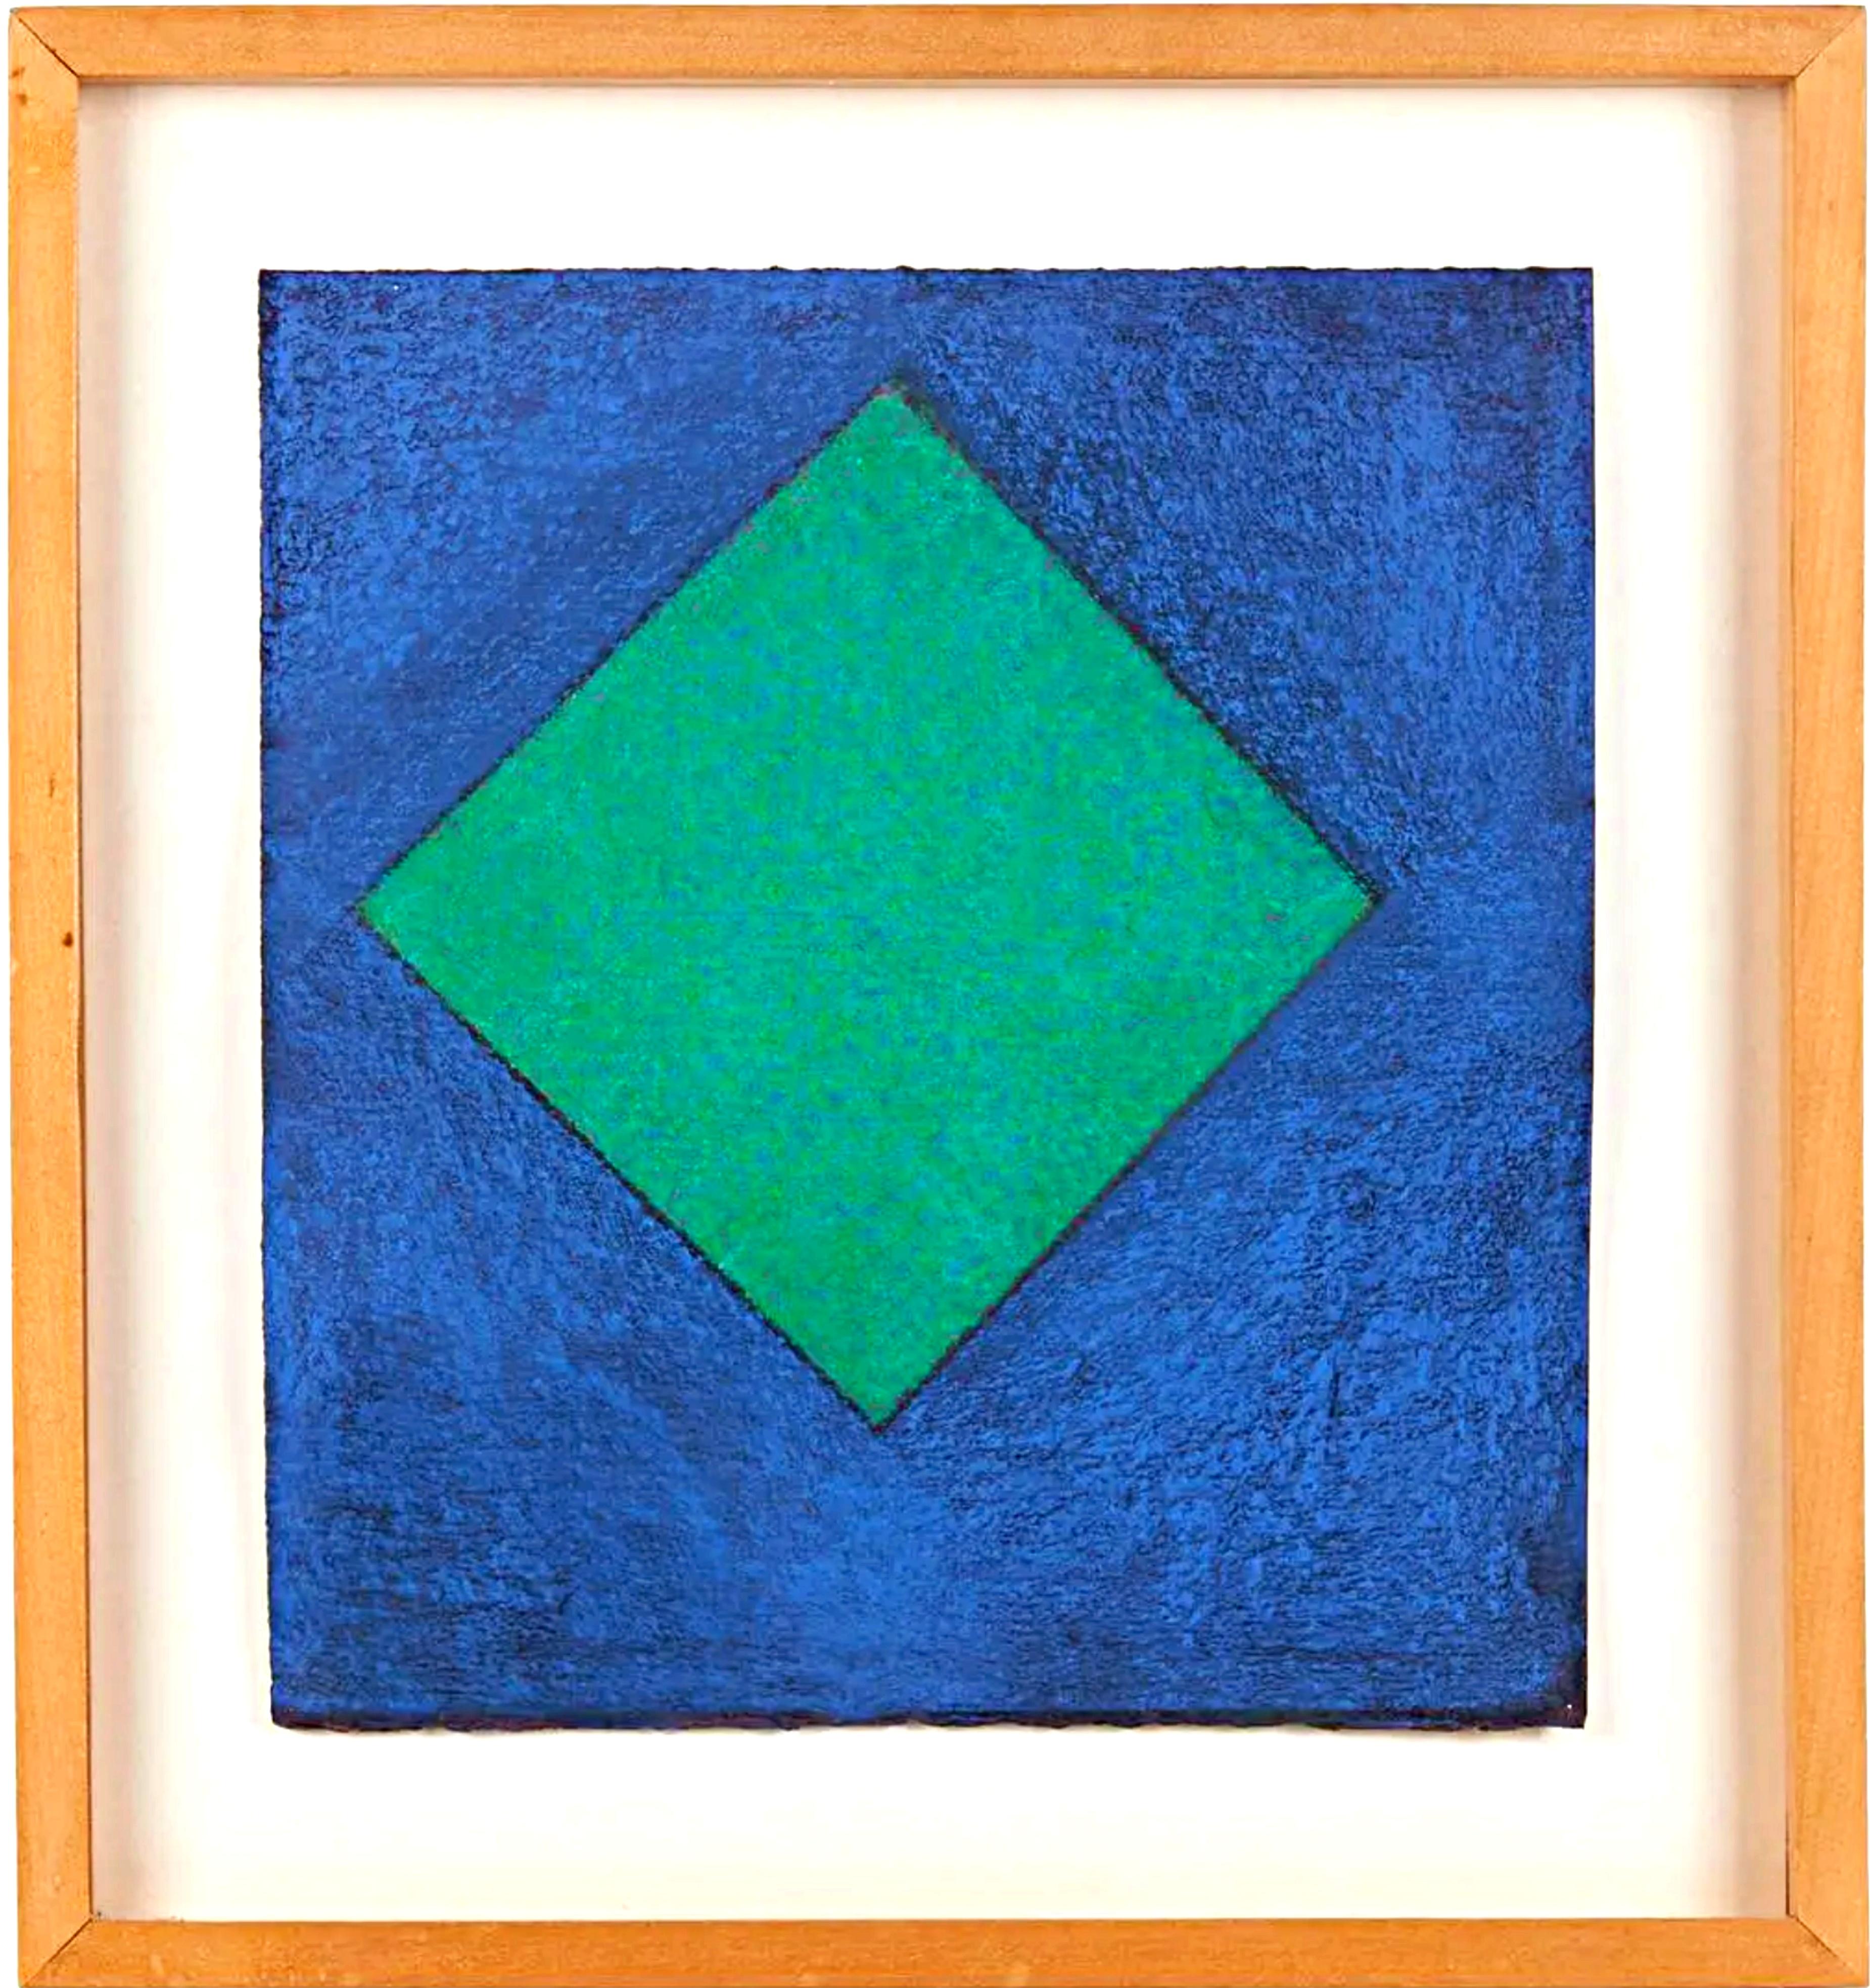 Untitled Geometric Abstraction Minimalist painting unique signed renowned artist - Painting by Winston Roeth